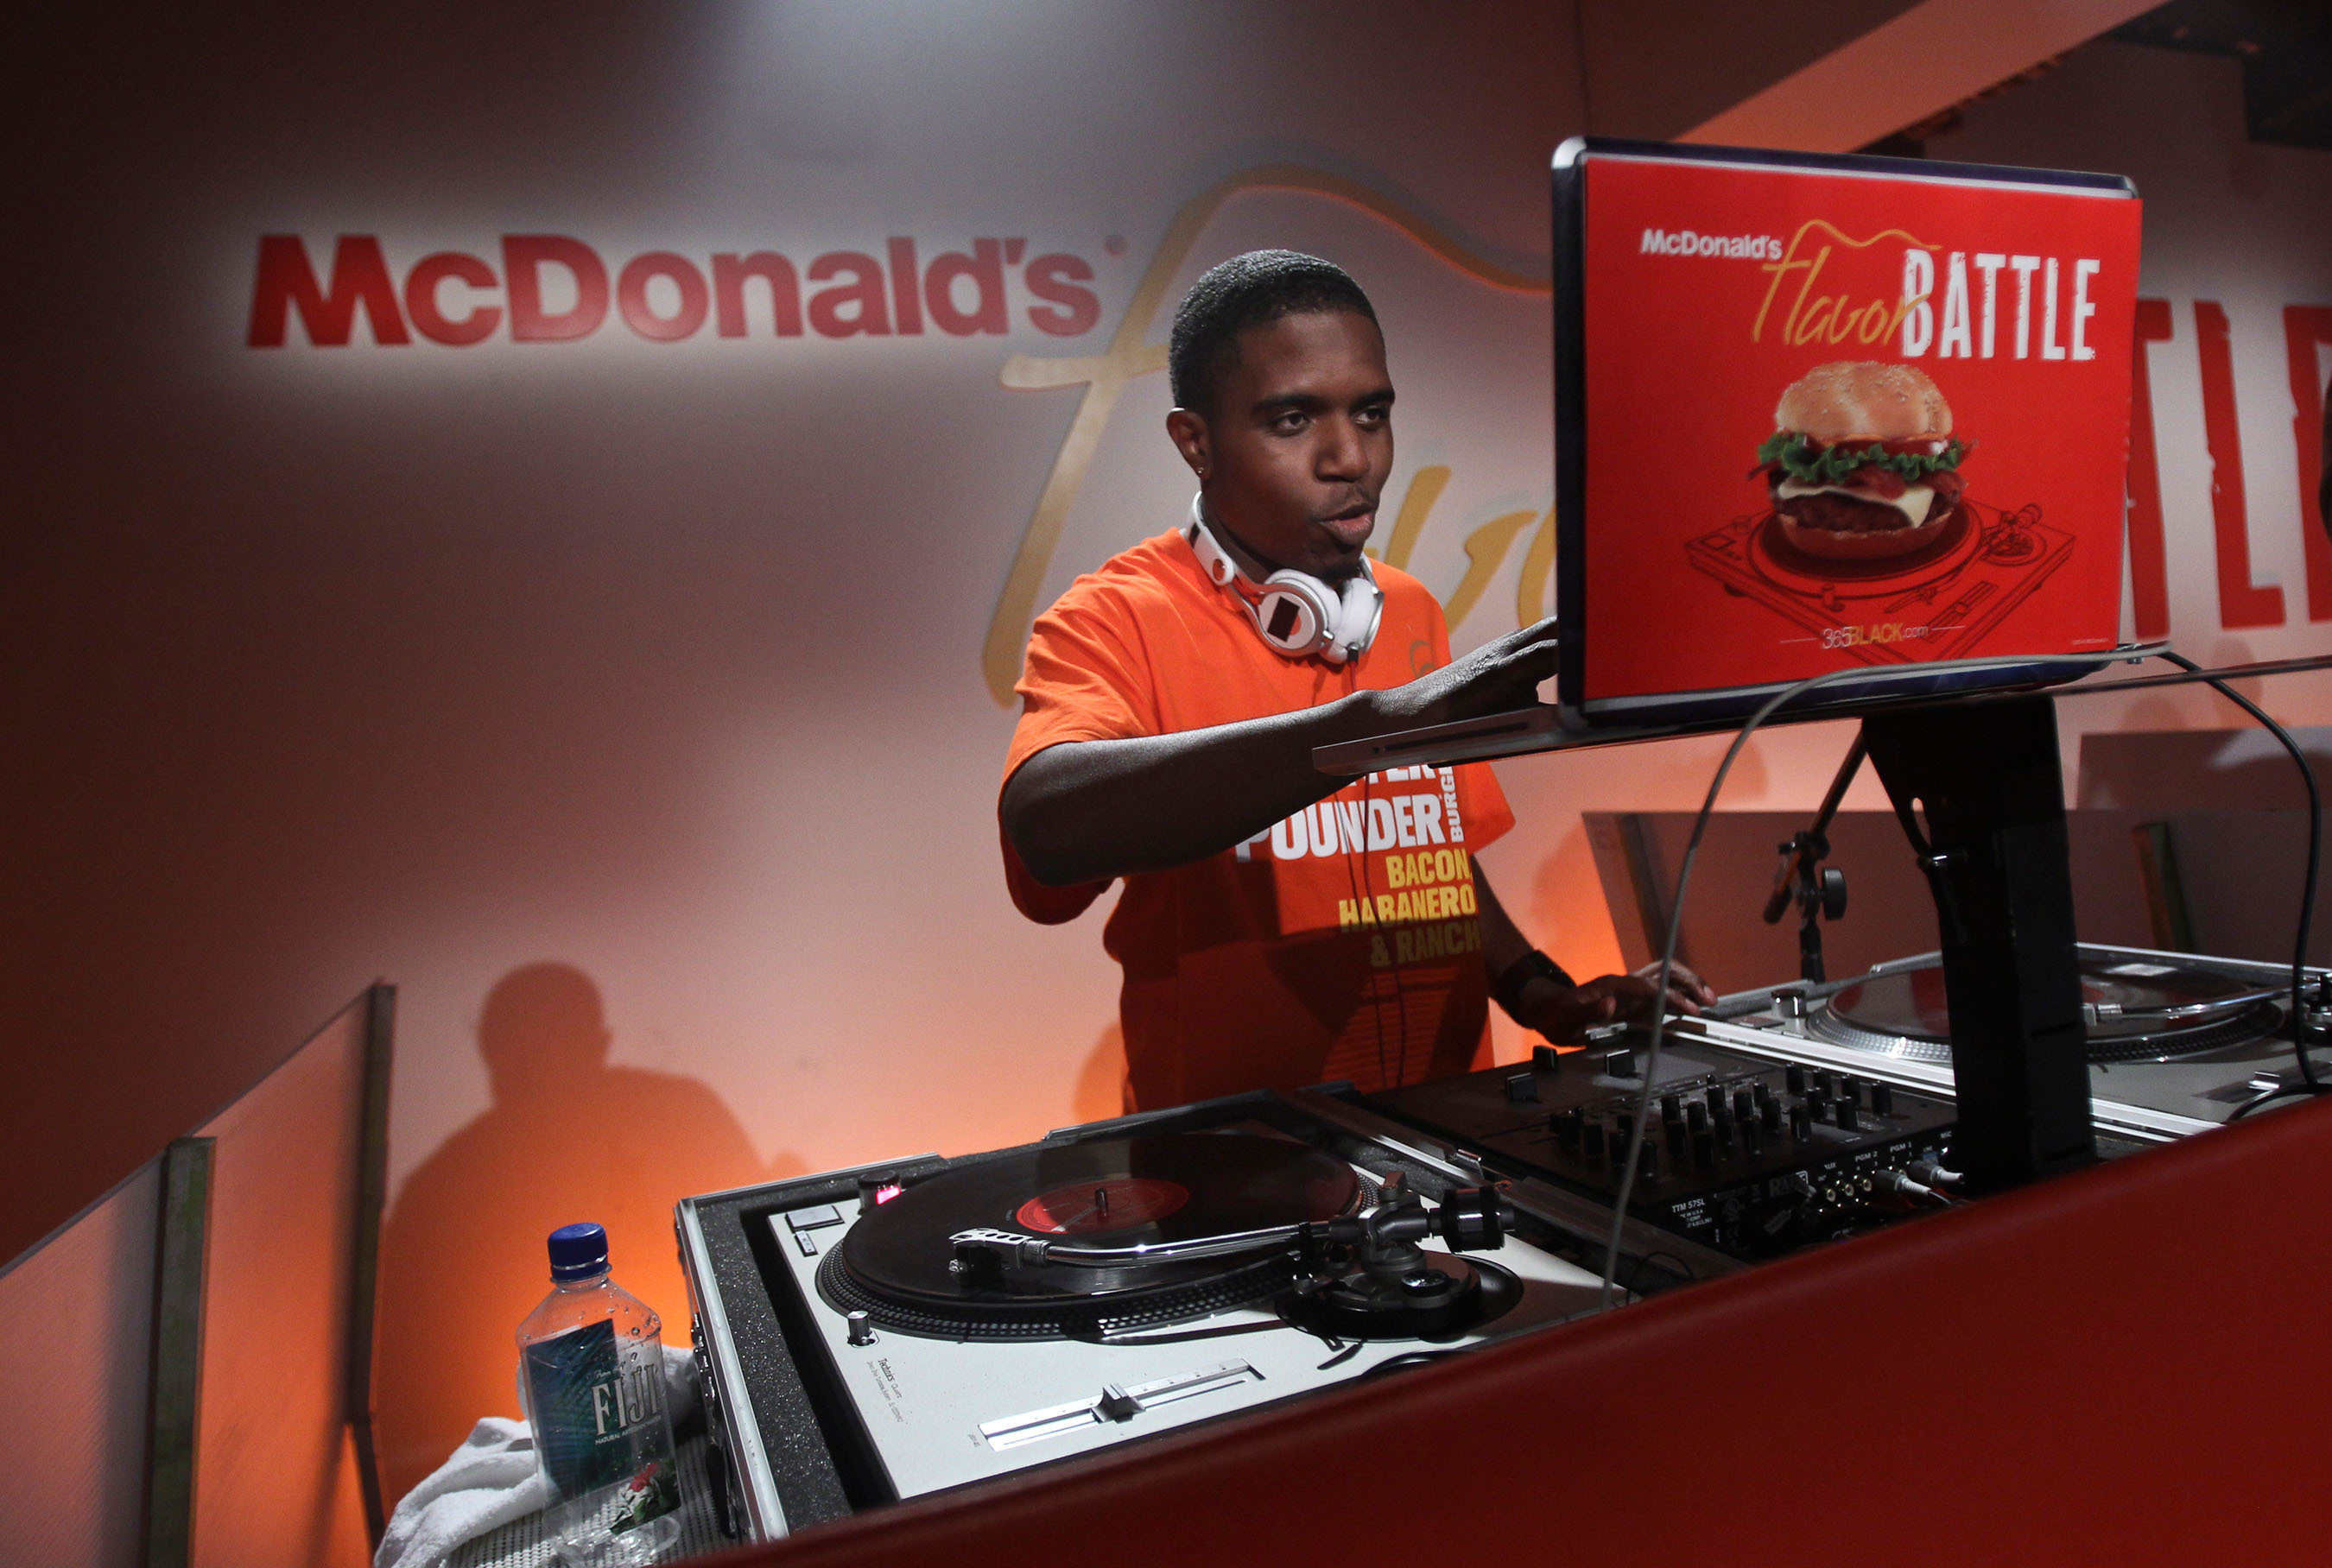 Eventual 2014 McDonald's Flavor Battle champion, DJ R-Tistic of Los Angeles, tests his turntables, mixer and computer as he prepares for the competition. The competition began with 12 DJs with DJ R-Tistic edging out DJ Niena Drake of Chicago and DJ Erika B of Newport News, VA, before a panel of celebrity judges and online viewers for the win. Watch the rebroadcast of the finale until March 30 on FlavorBattle.com. Photo credit: Soul Brother. (PRNewsFoto/McDonald's) (PRNewsFoto/MCDONALD'S)